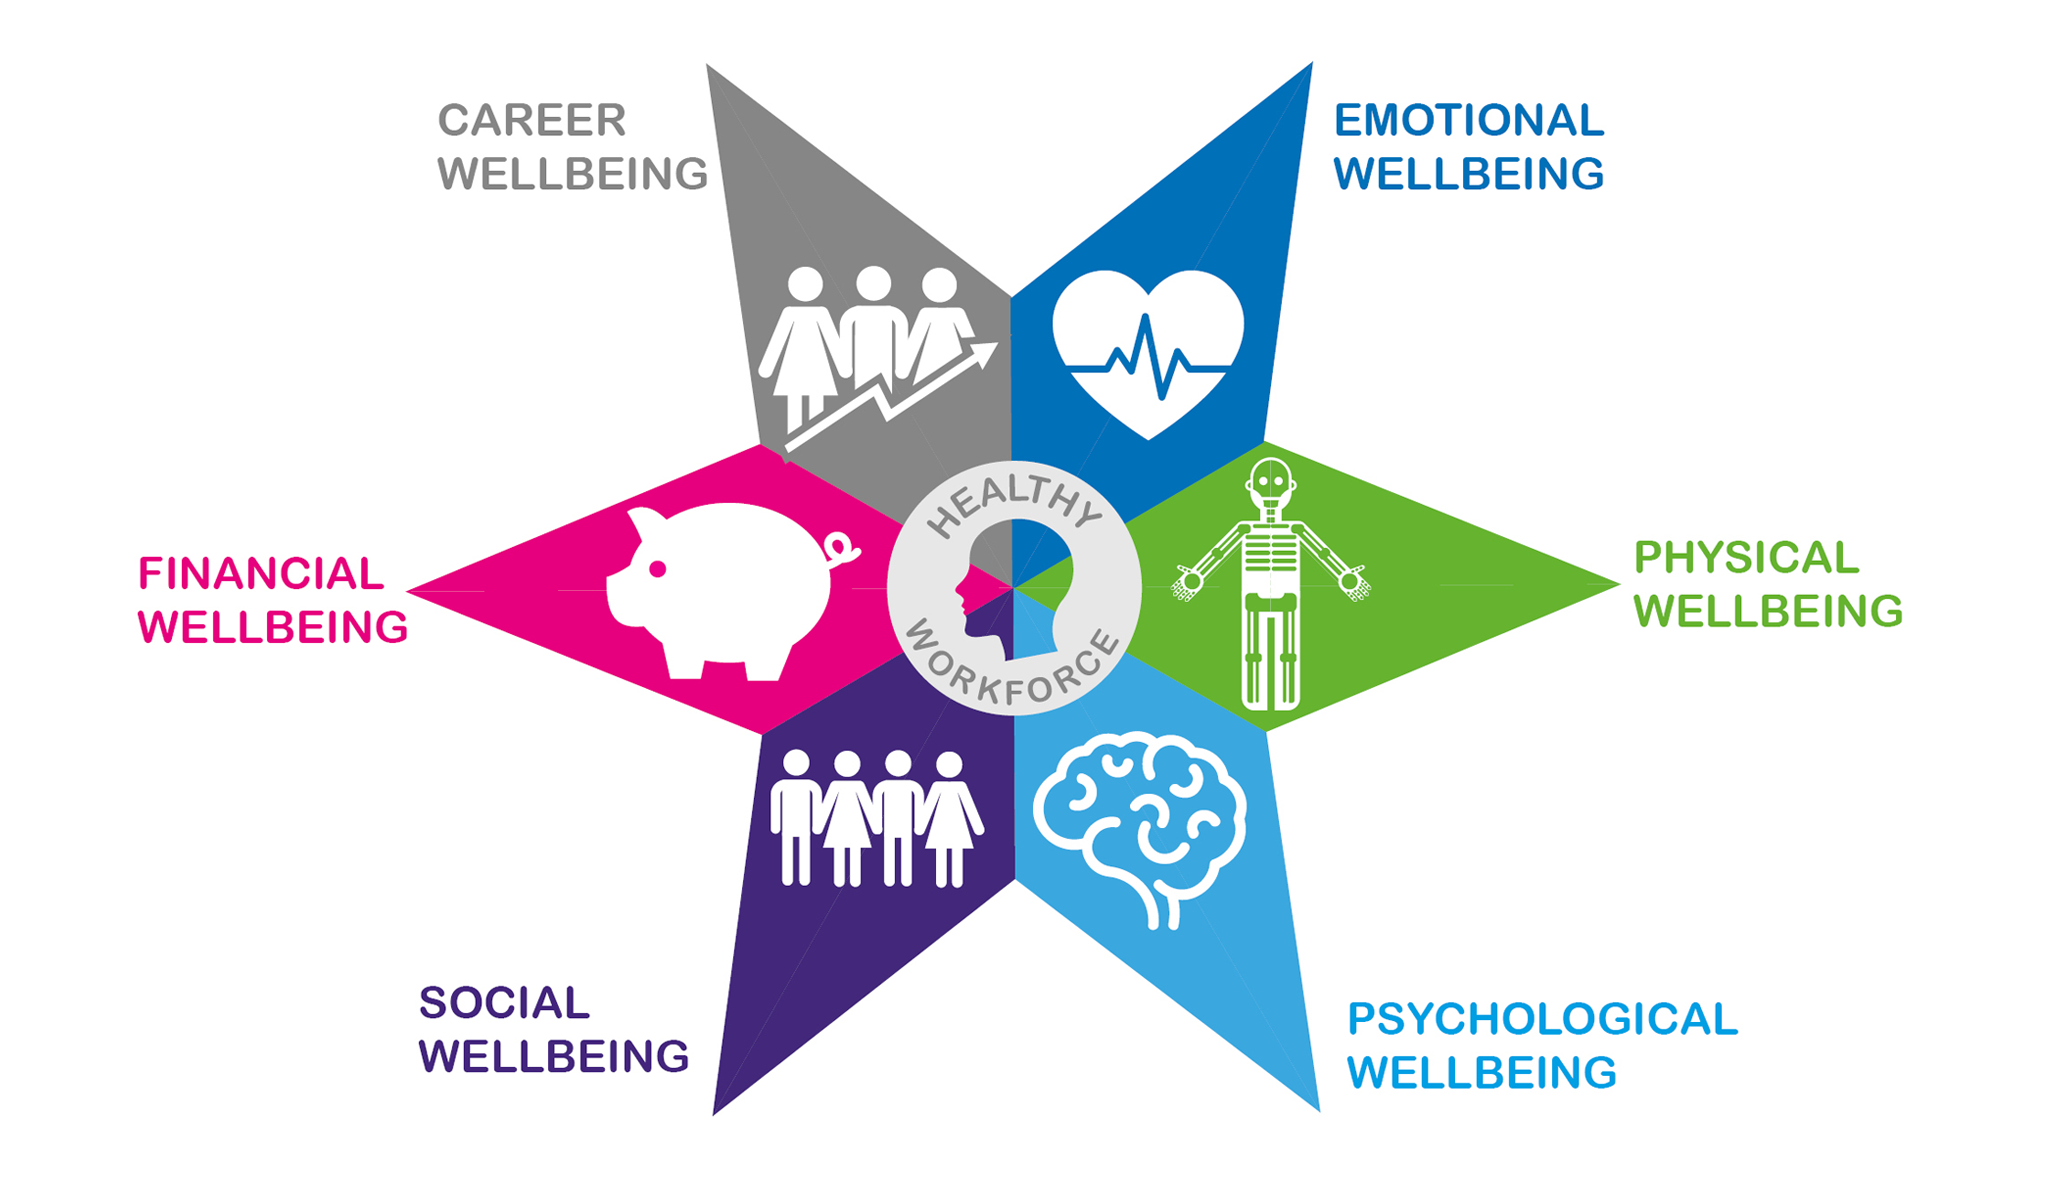 Graphic of a 6 point star featuring the 6 elements of wellbeing: career wellbeing, emotional wellbeing, physical wellbeing, psychological wellbeing, social wellbeing, financial wellbeing, career wellbeing